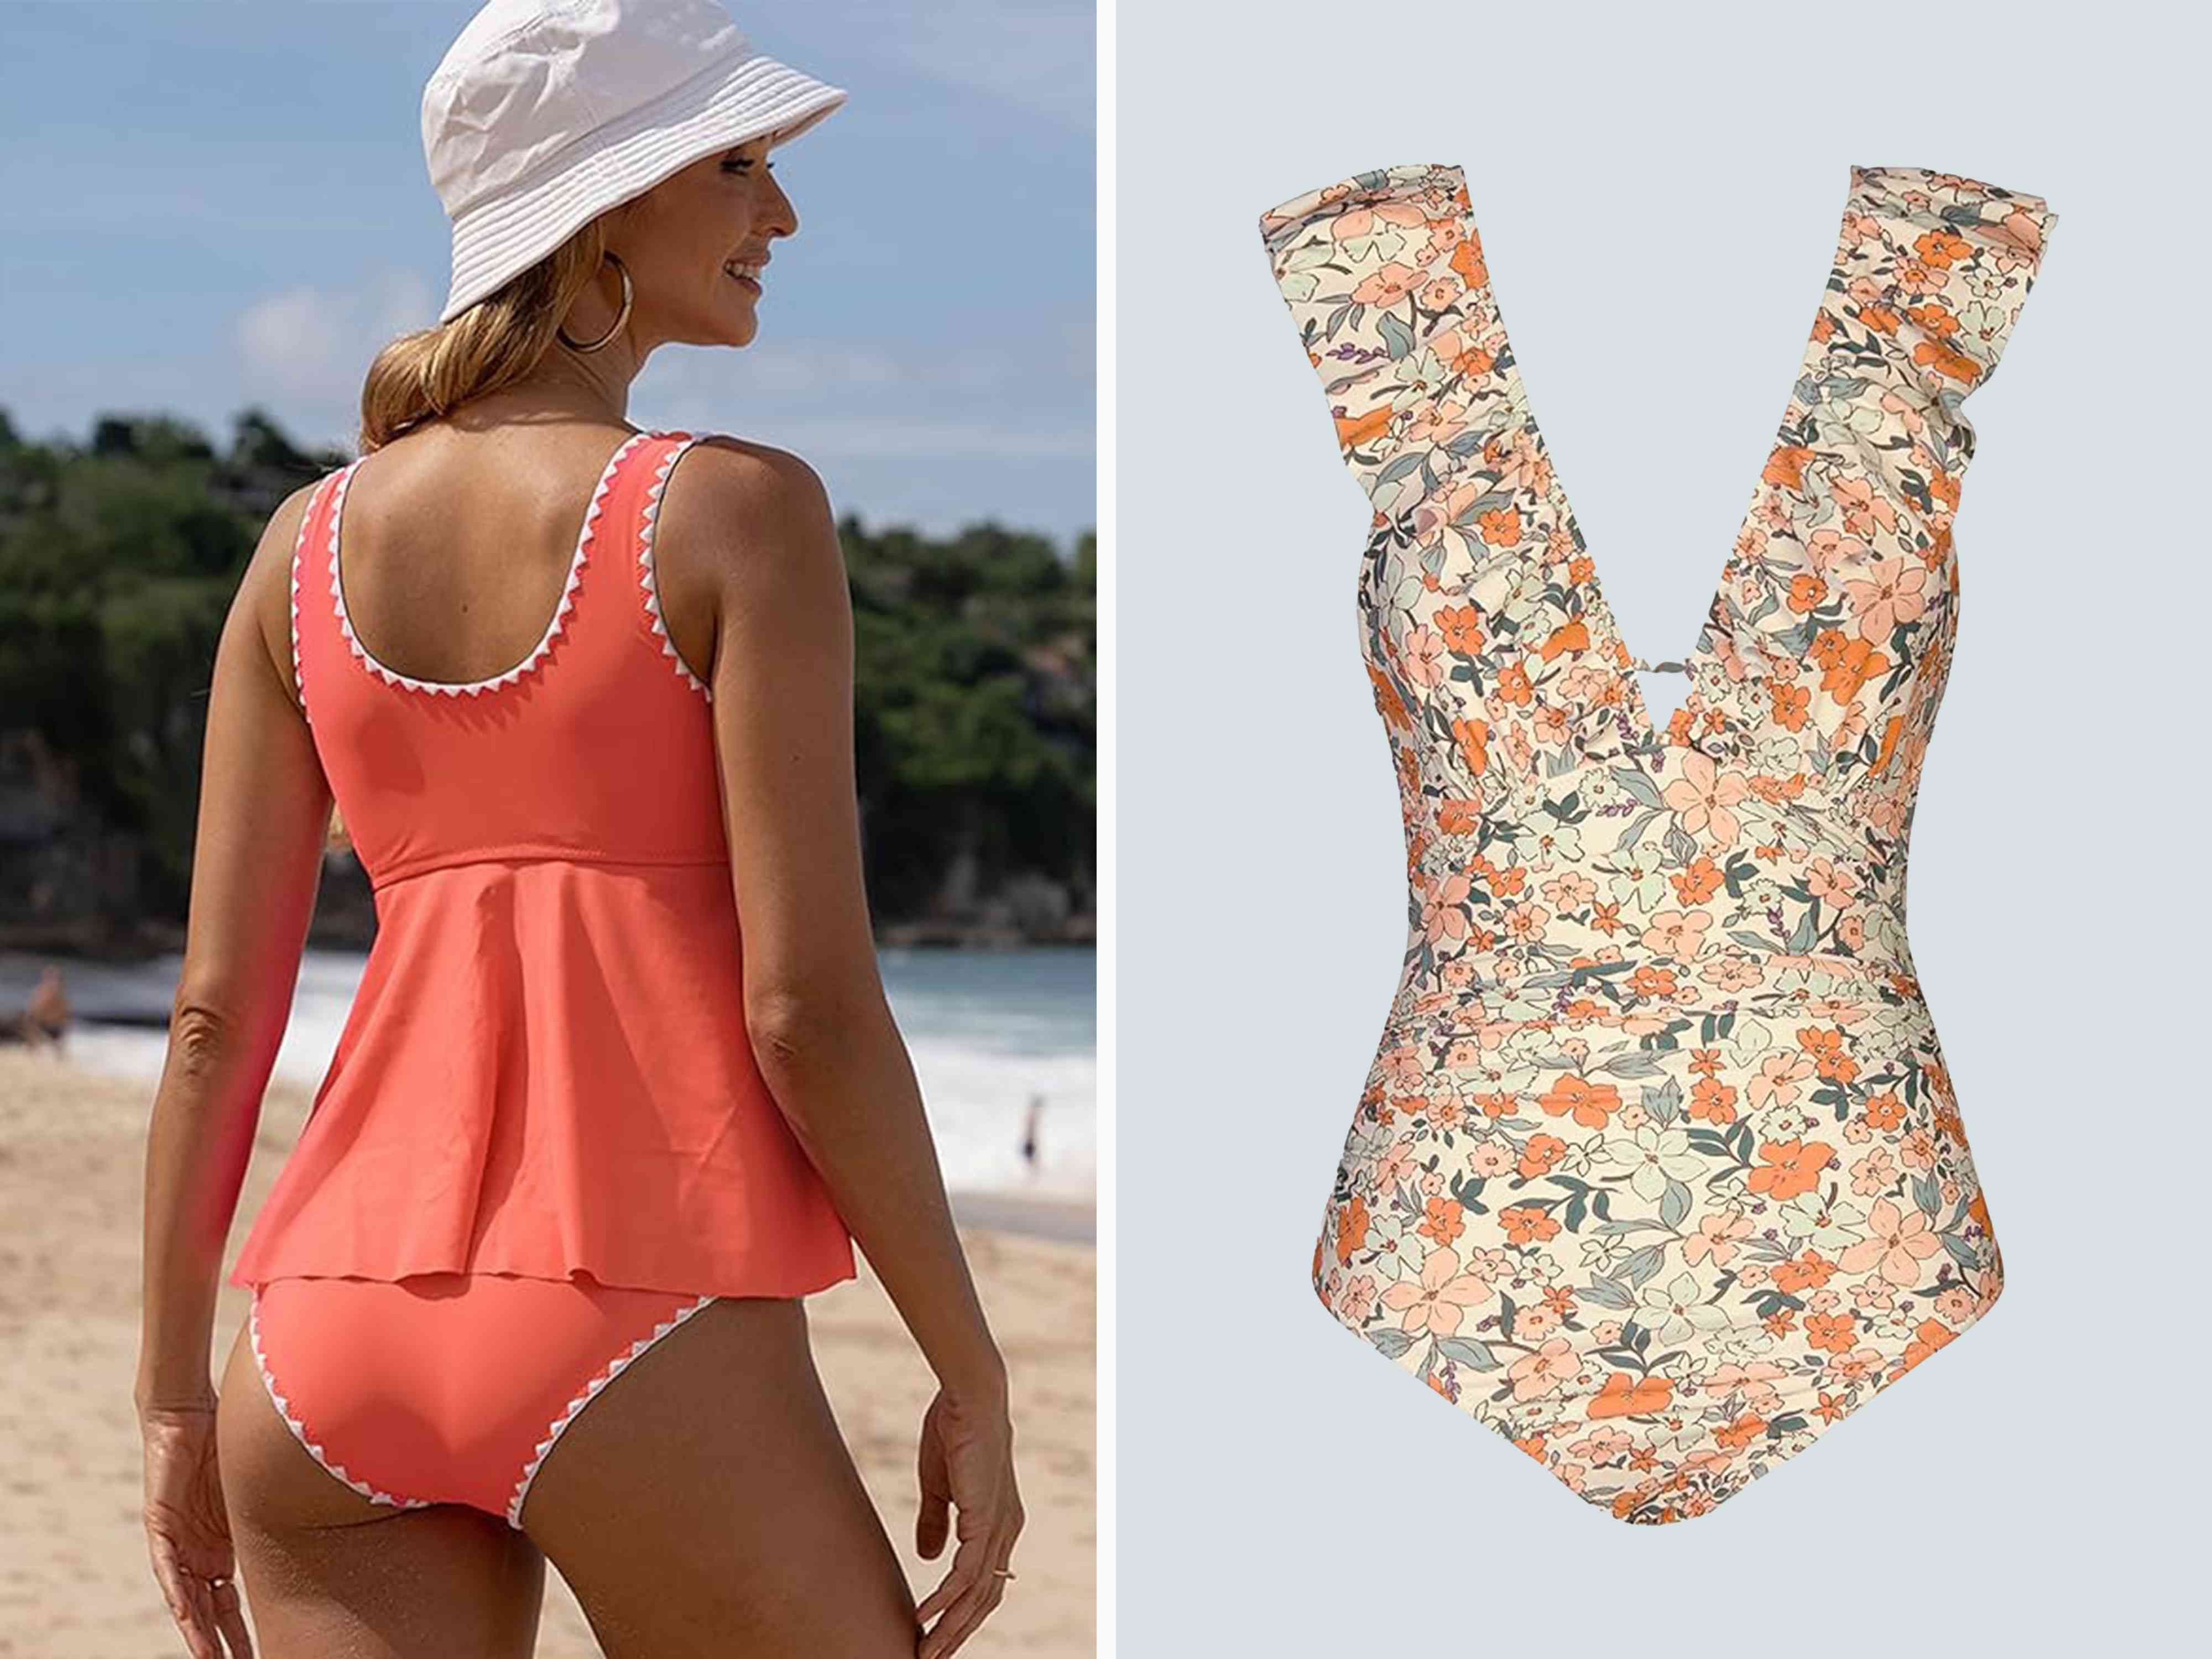 Amazon Has 50,000+ Swimsuits, but Shoppers Love These 50 Flattering Styles the Most